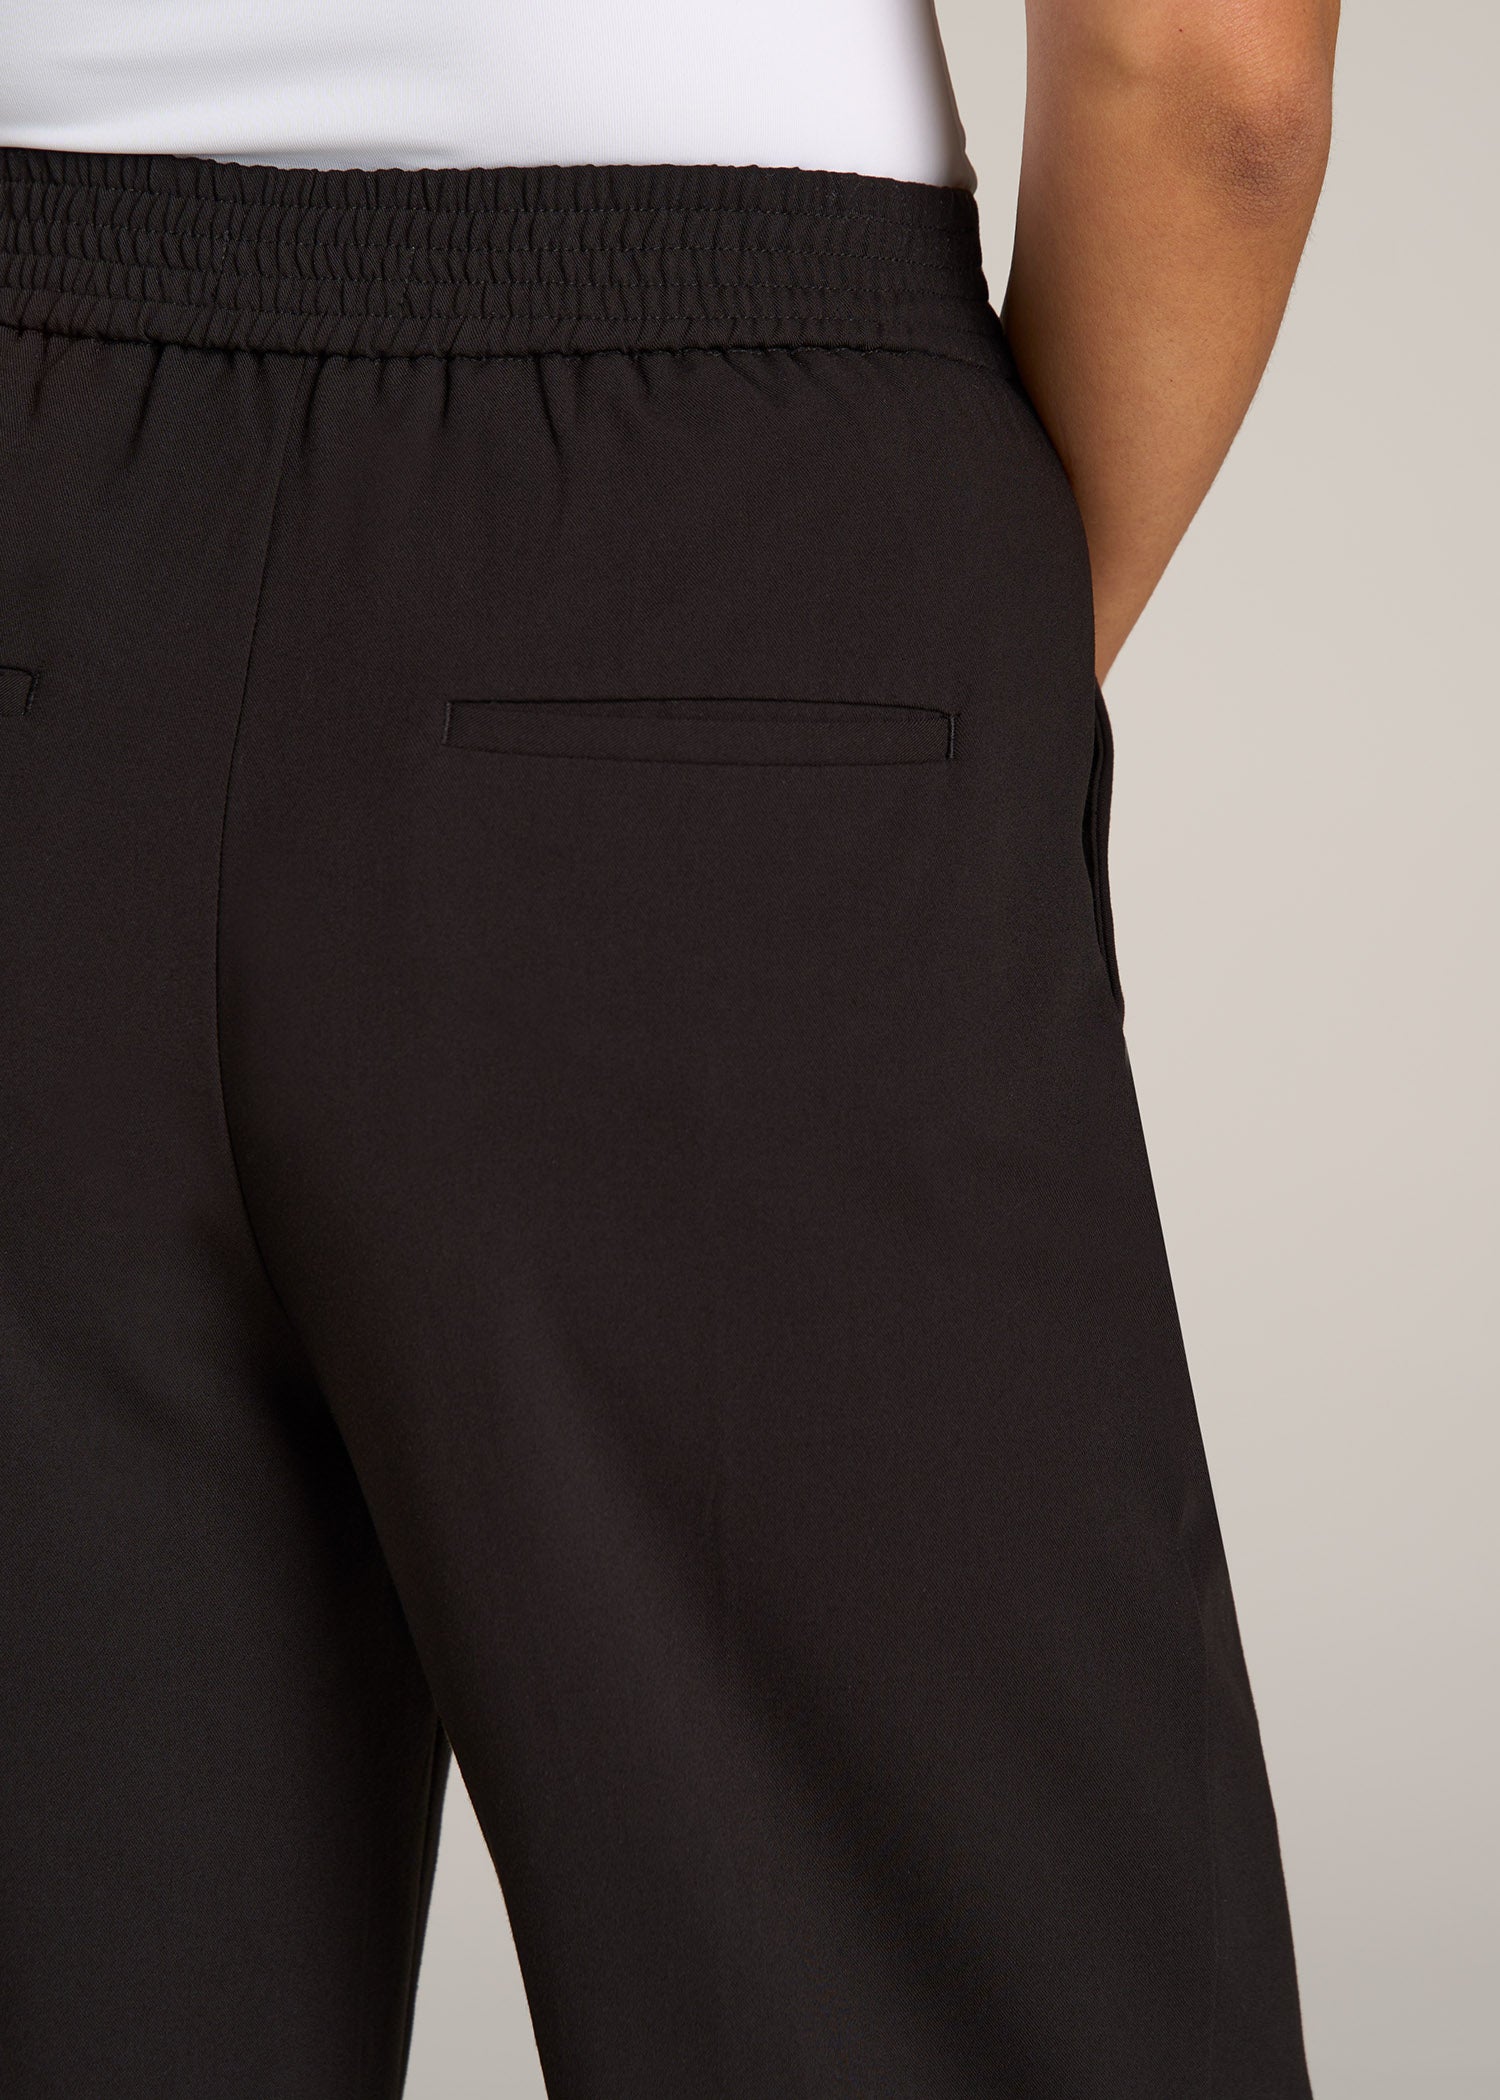 lululemon athletica, Pants & Jumpsuits, New On The Fly Wide Leg Pant